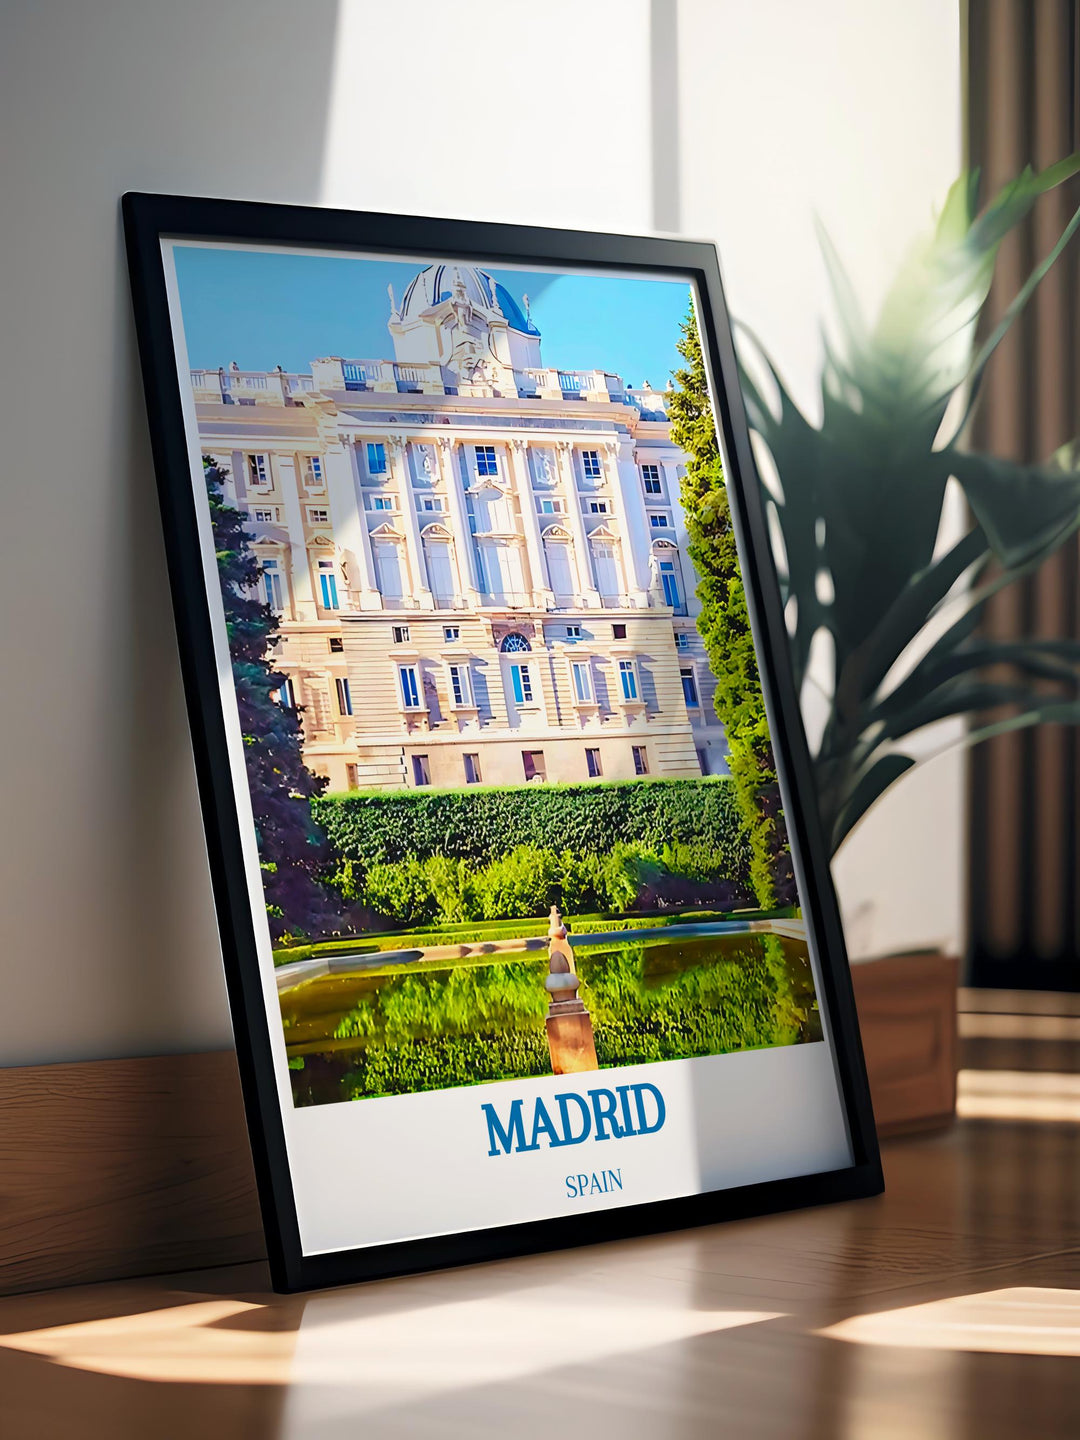 Madrid street art print, vibrant and colorful, reflecting the citys lively urban culture.